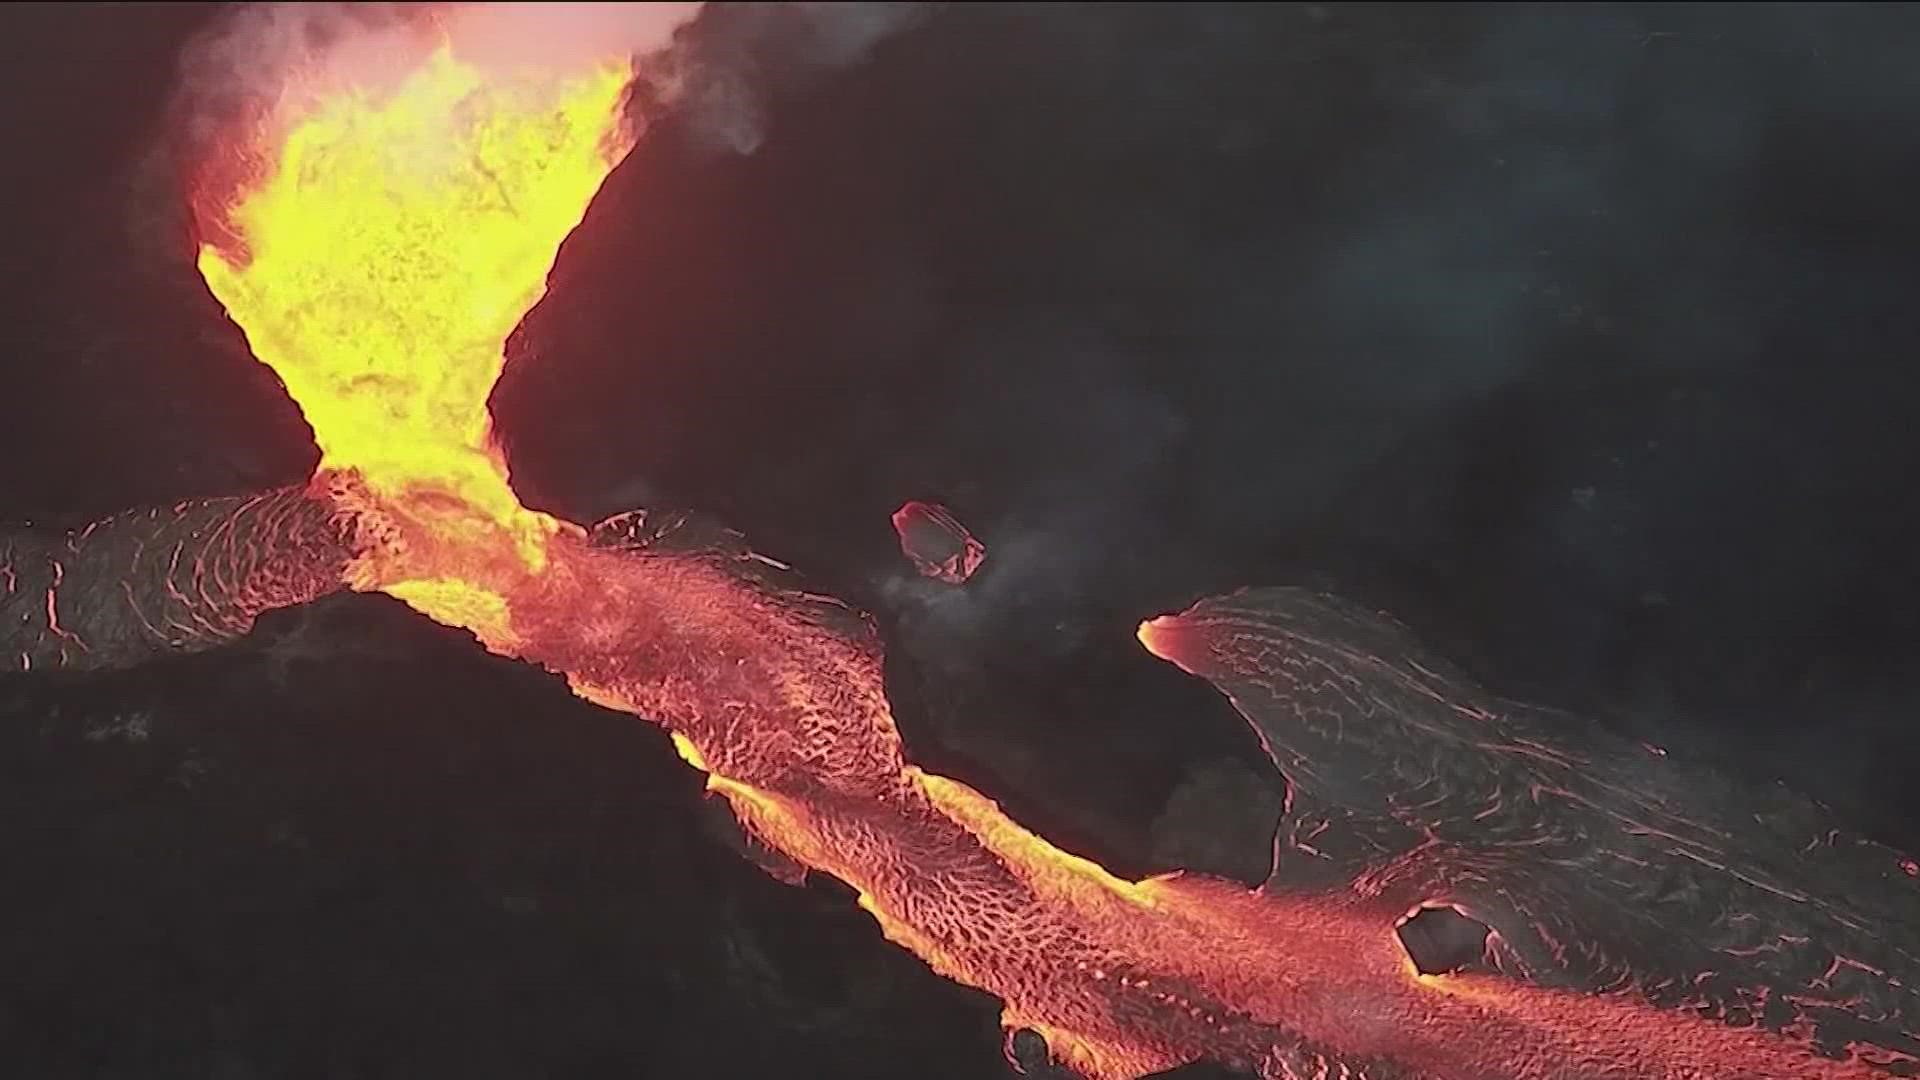 Lava is shooting 100 feet to 200 feet (30 to 60 meters) into the air as Hawaii's Mauna Loa, the world's largest active volcano, erupts for the first time in nearly 4